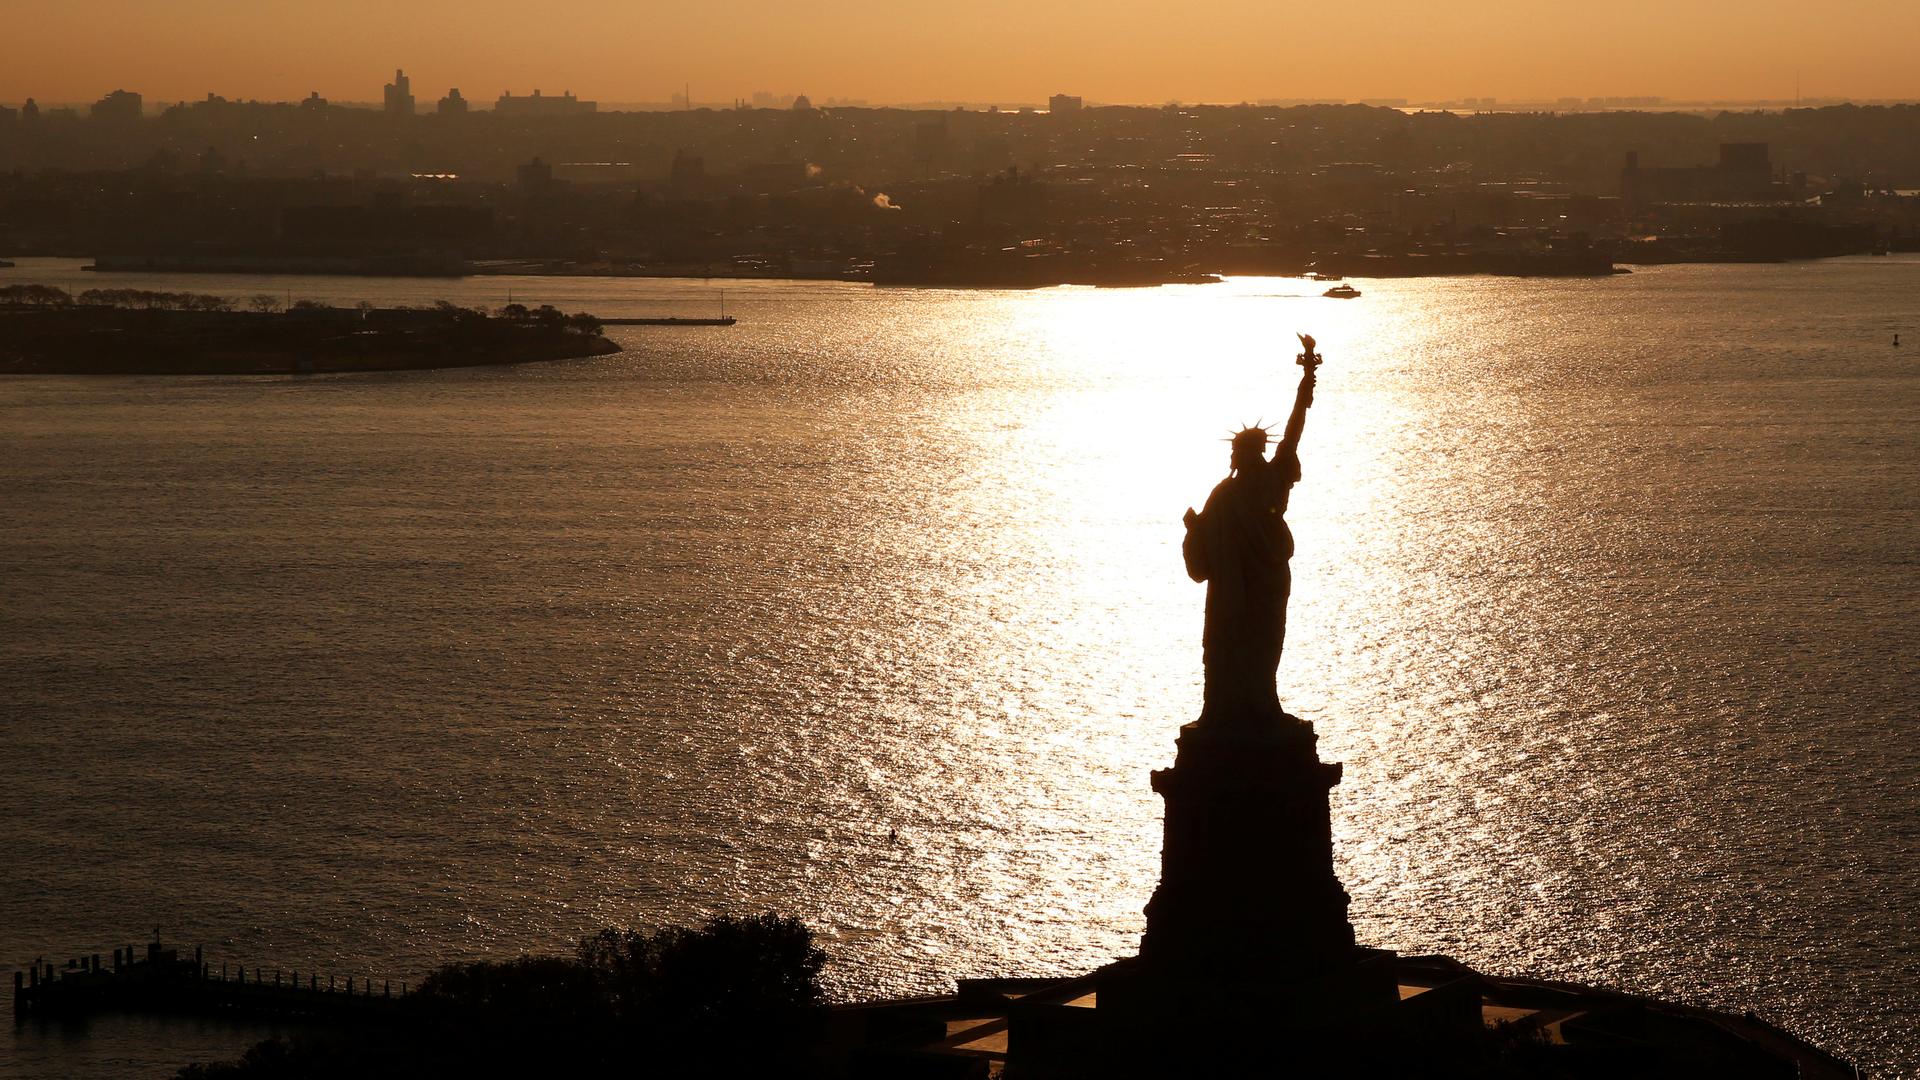 The sun rises on the Statue of Liberty, in New York, November 2nd 2016